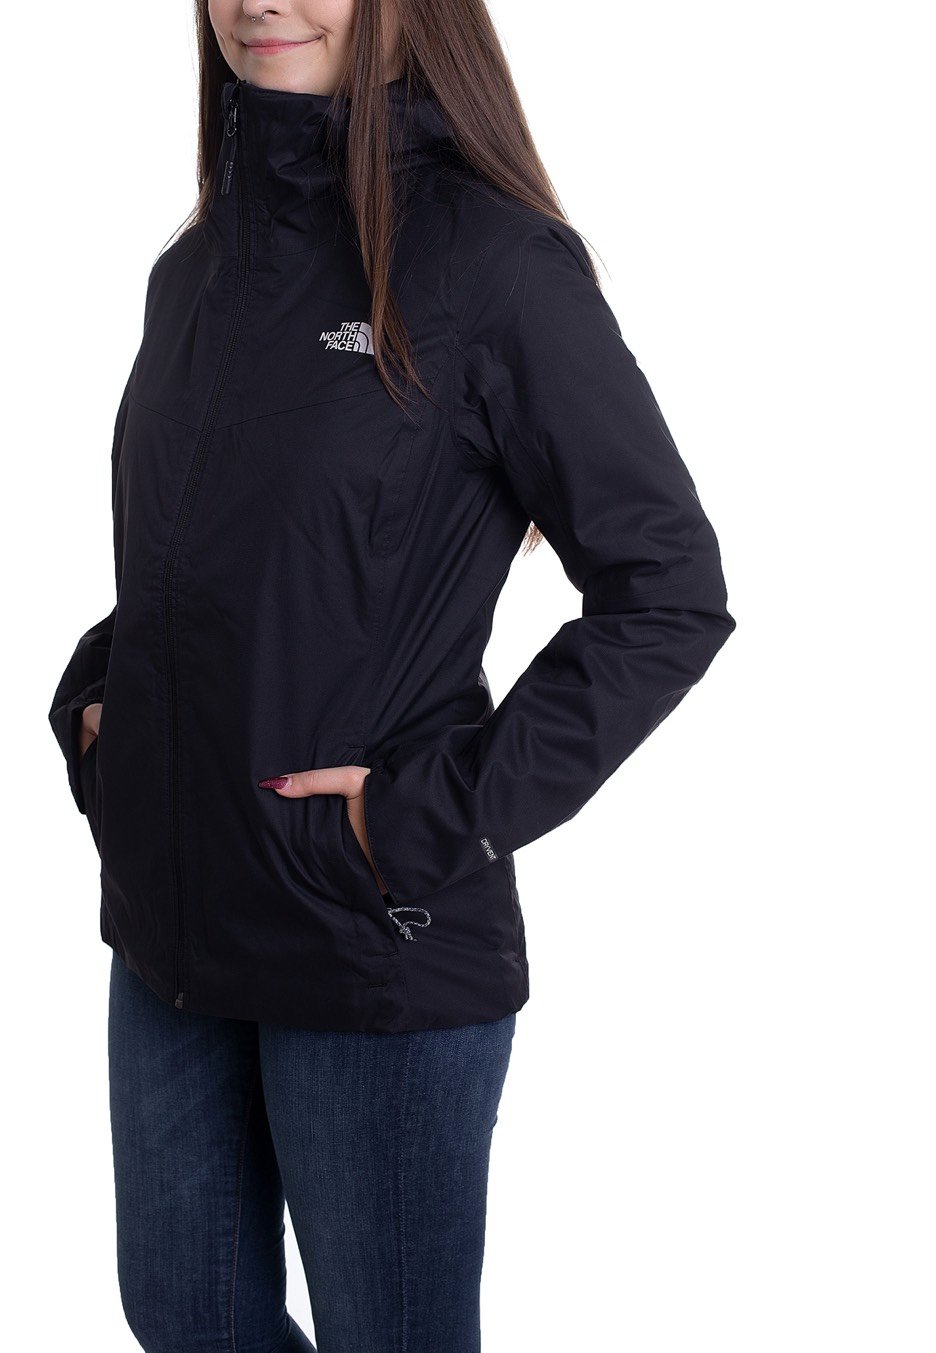 The North Face - Quest Insulated TNF Black - Jacket